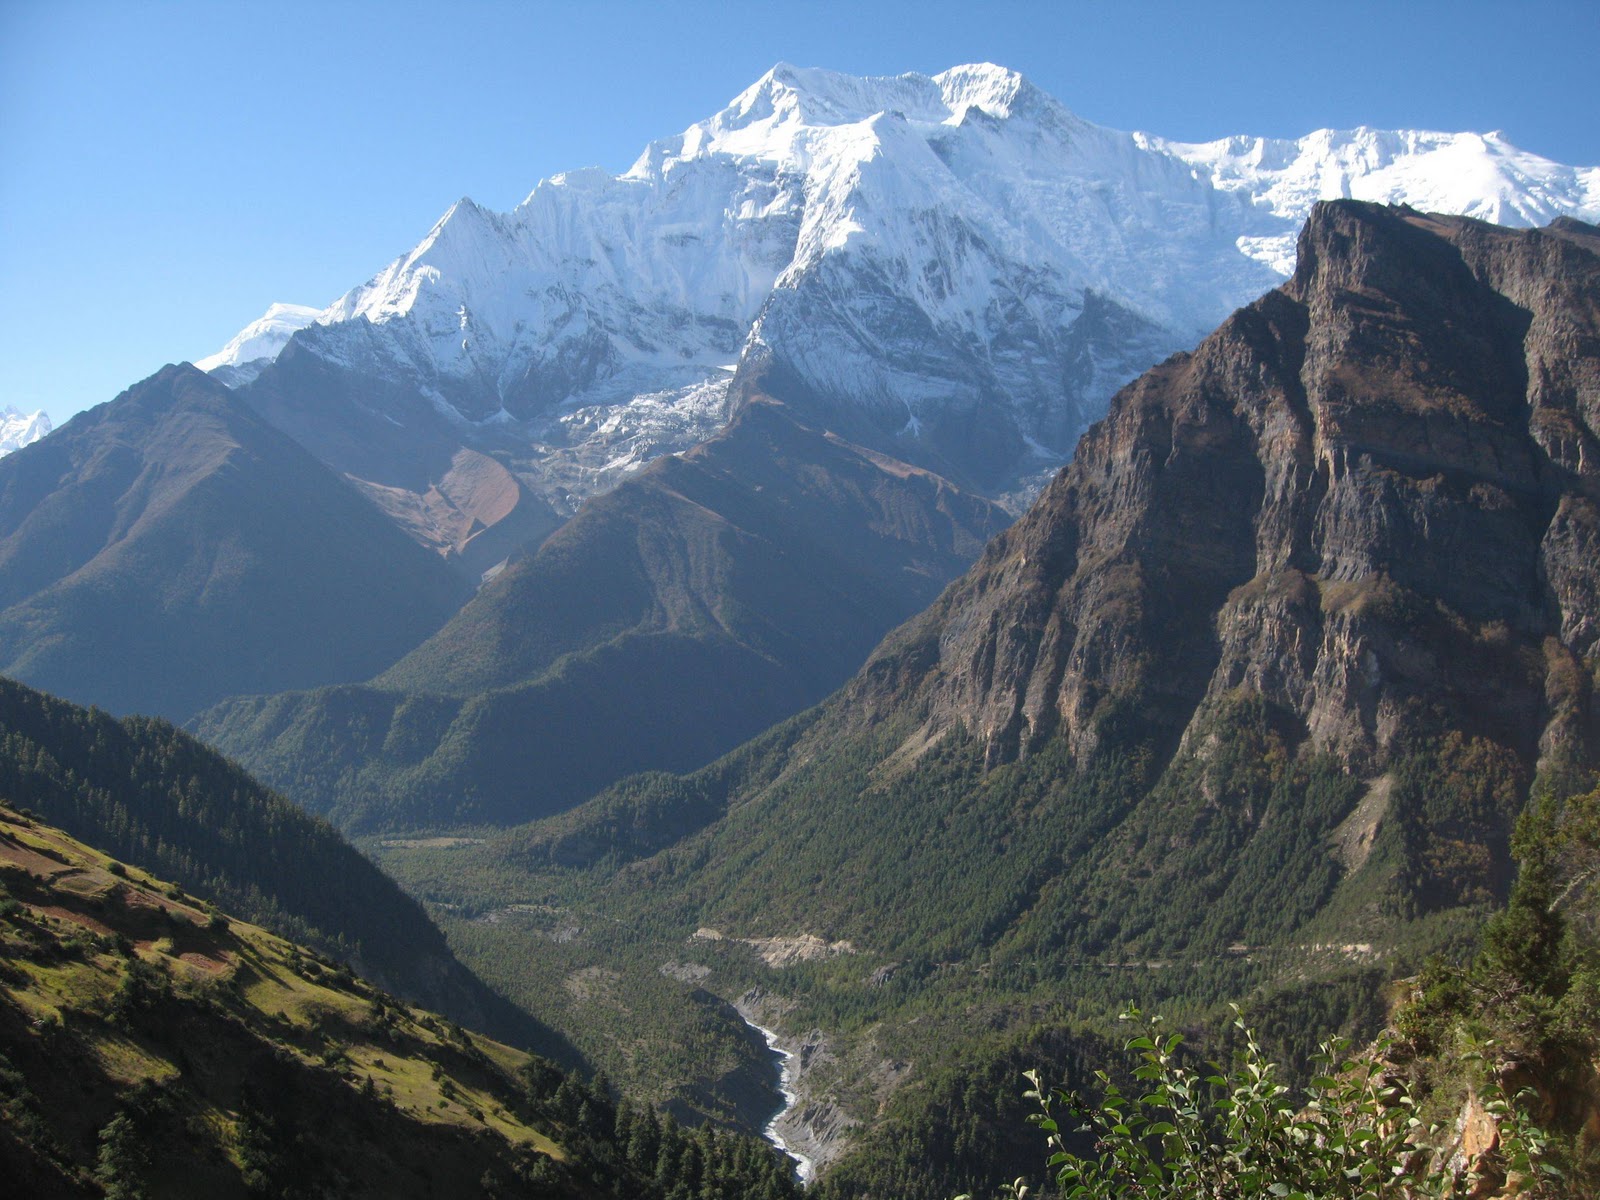 Corrosive Canvas: View of Annapurna II from Ghyaru, Nepal on the ...